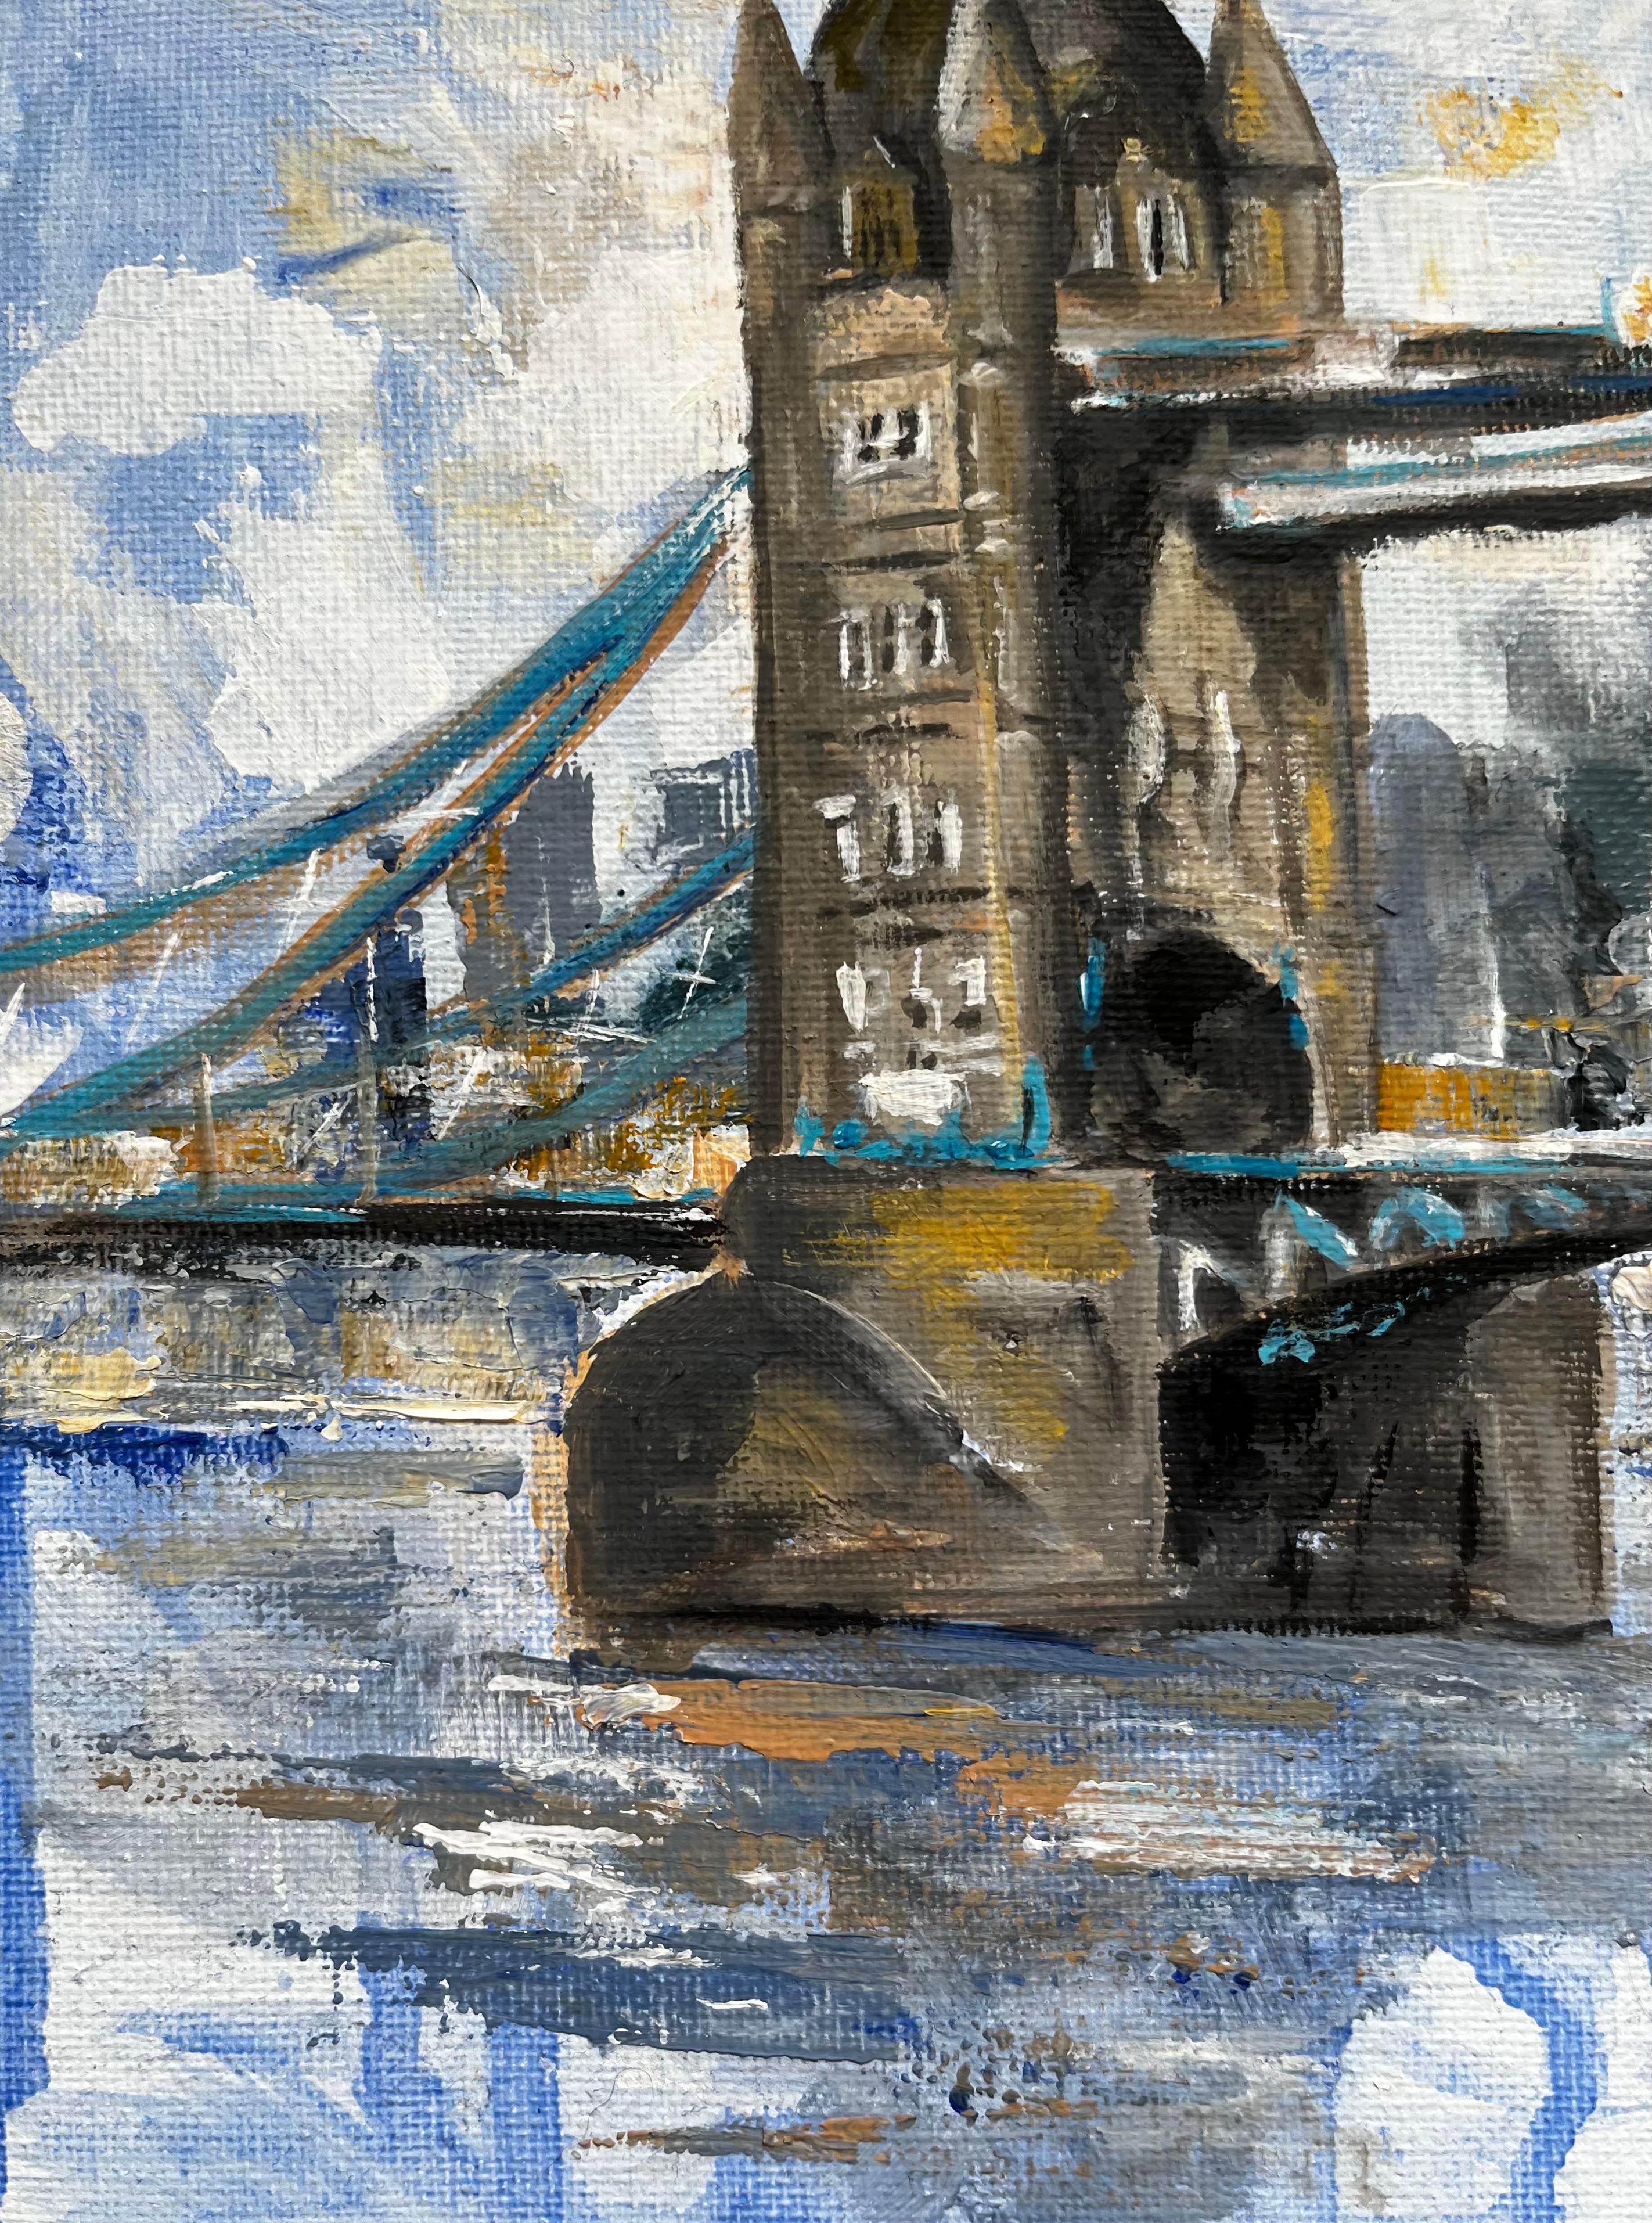 London Bridge, River Thames
signed by Minty Ramsey, British contemporary 
acrylic painting on Canvas
9 x 12 inches

Wonderful original painting by the British contemporary artist, Minty Ramsey. 